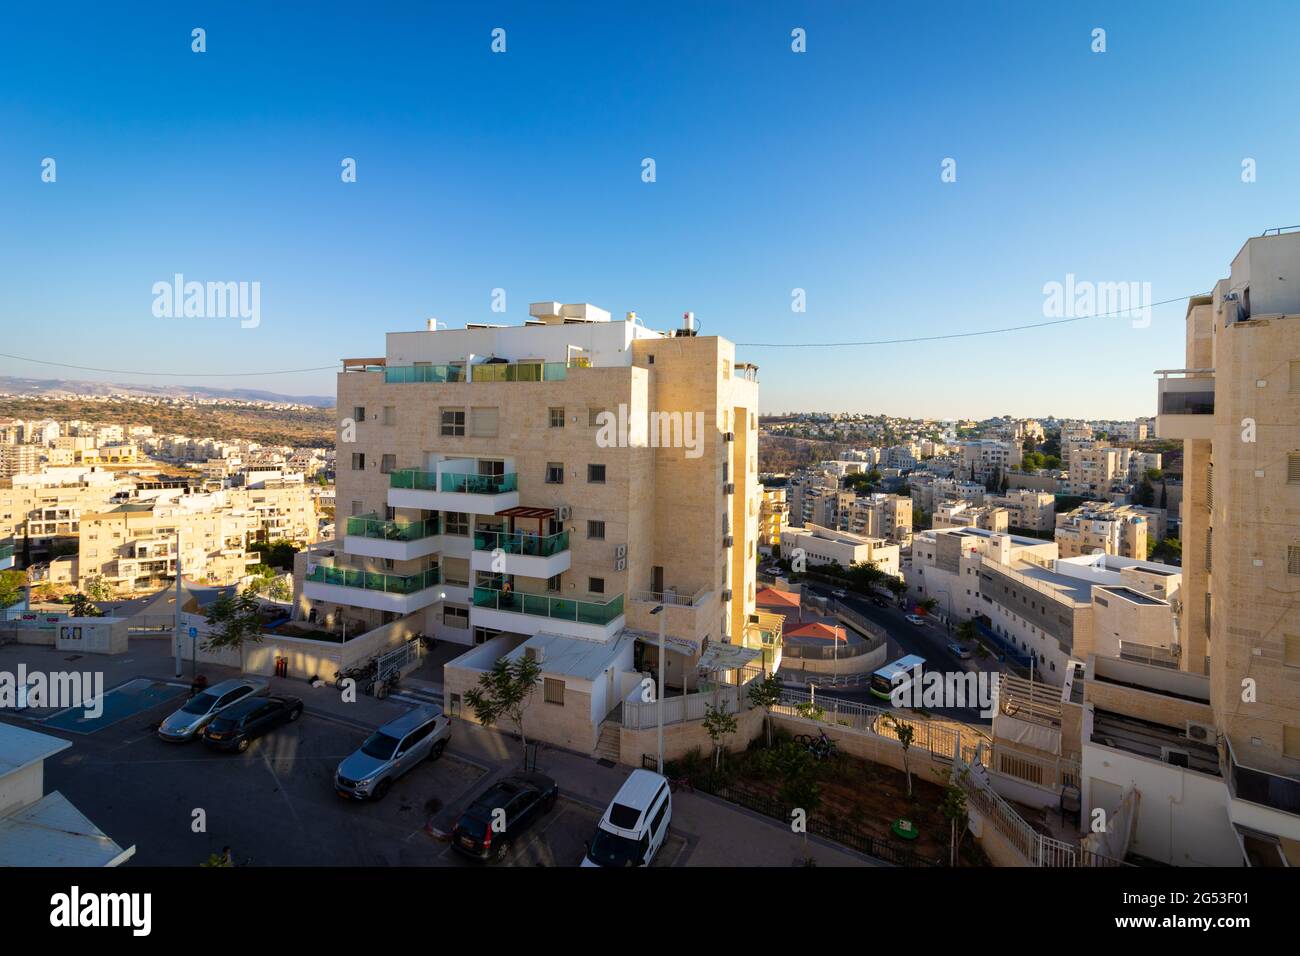 24-06-2021. modiin ilit- israel. Top view of the buildings on the streets of Kiryat Sefer Stock Photo